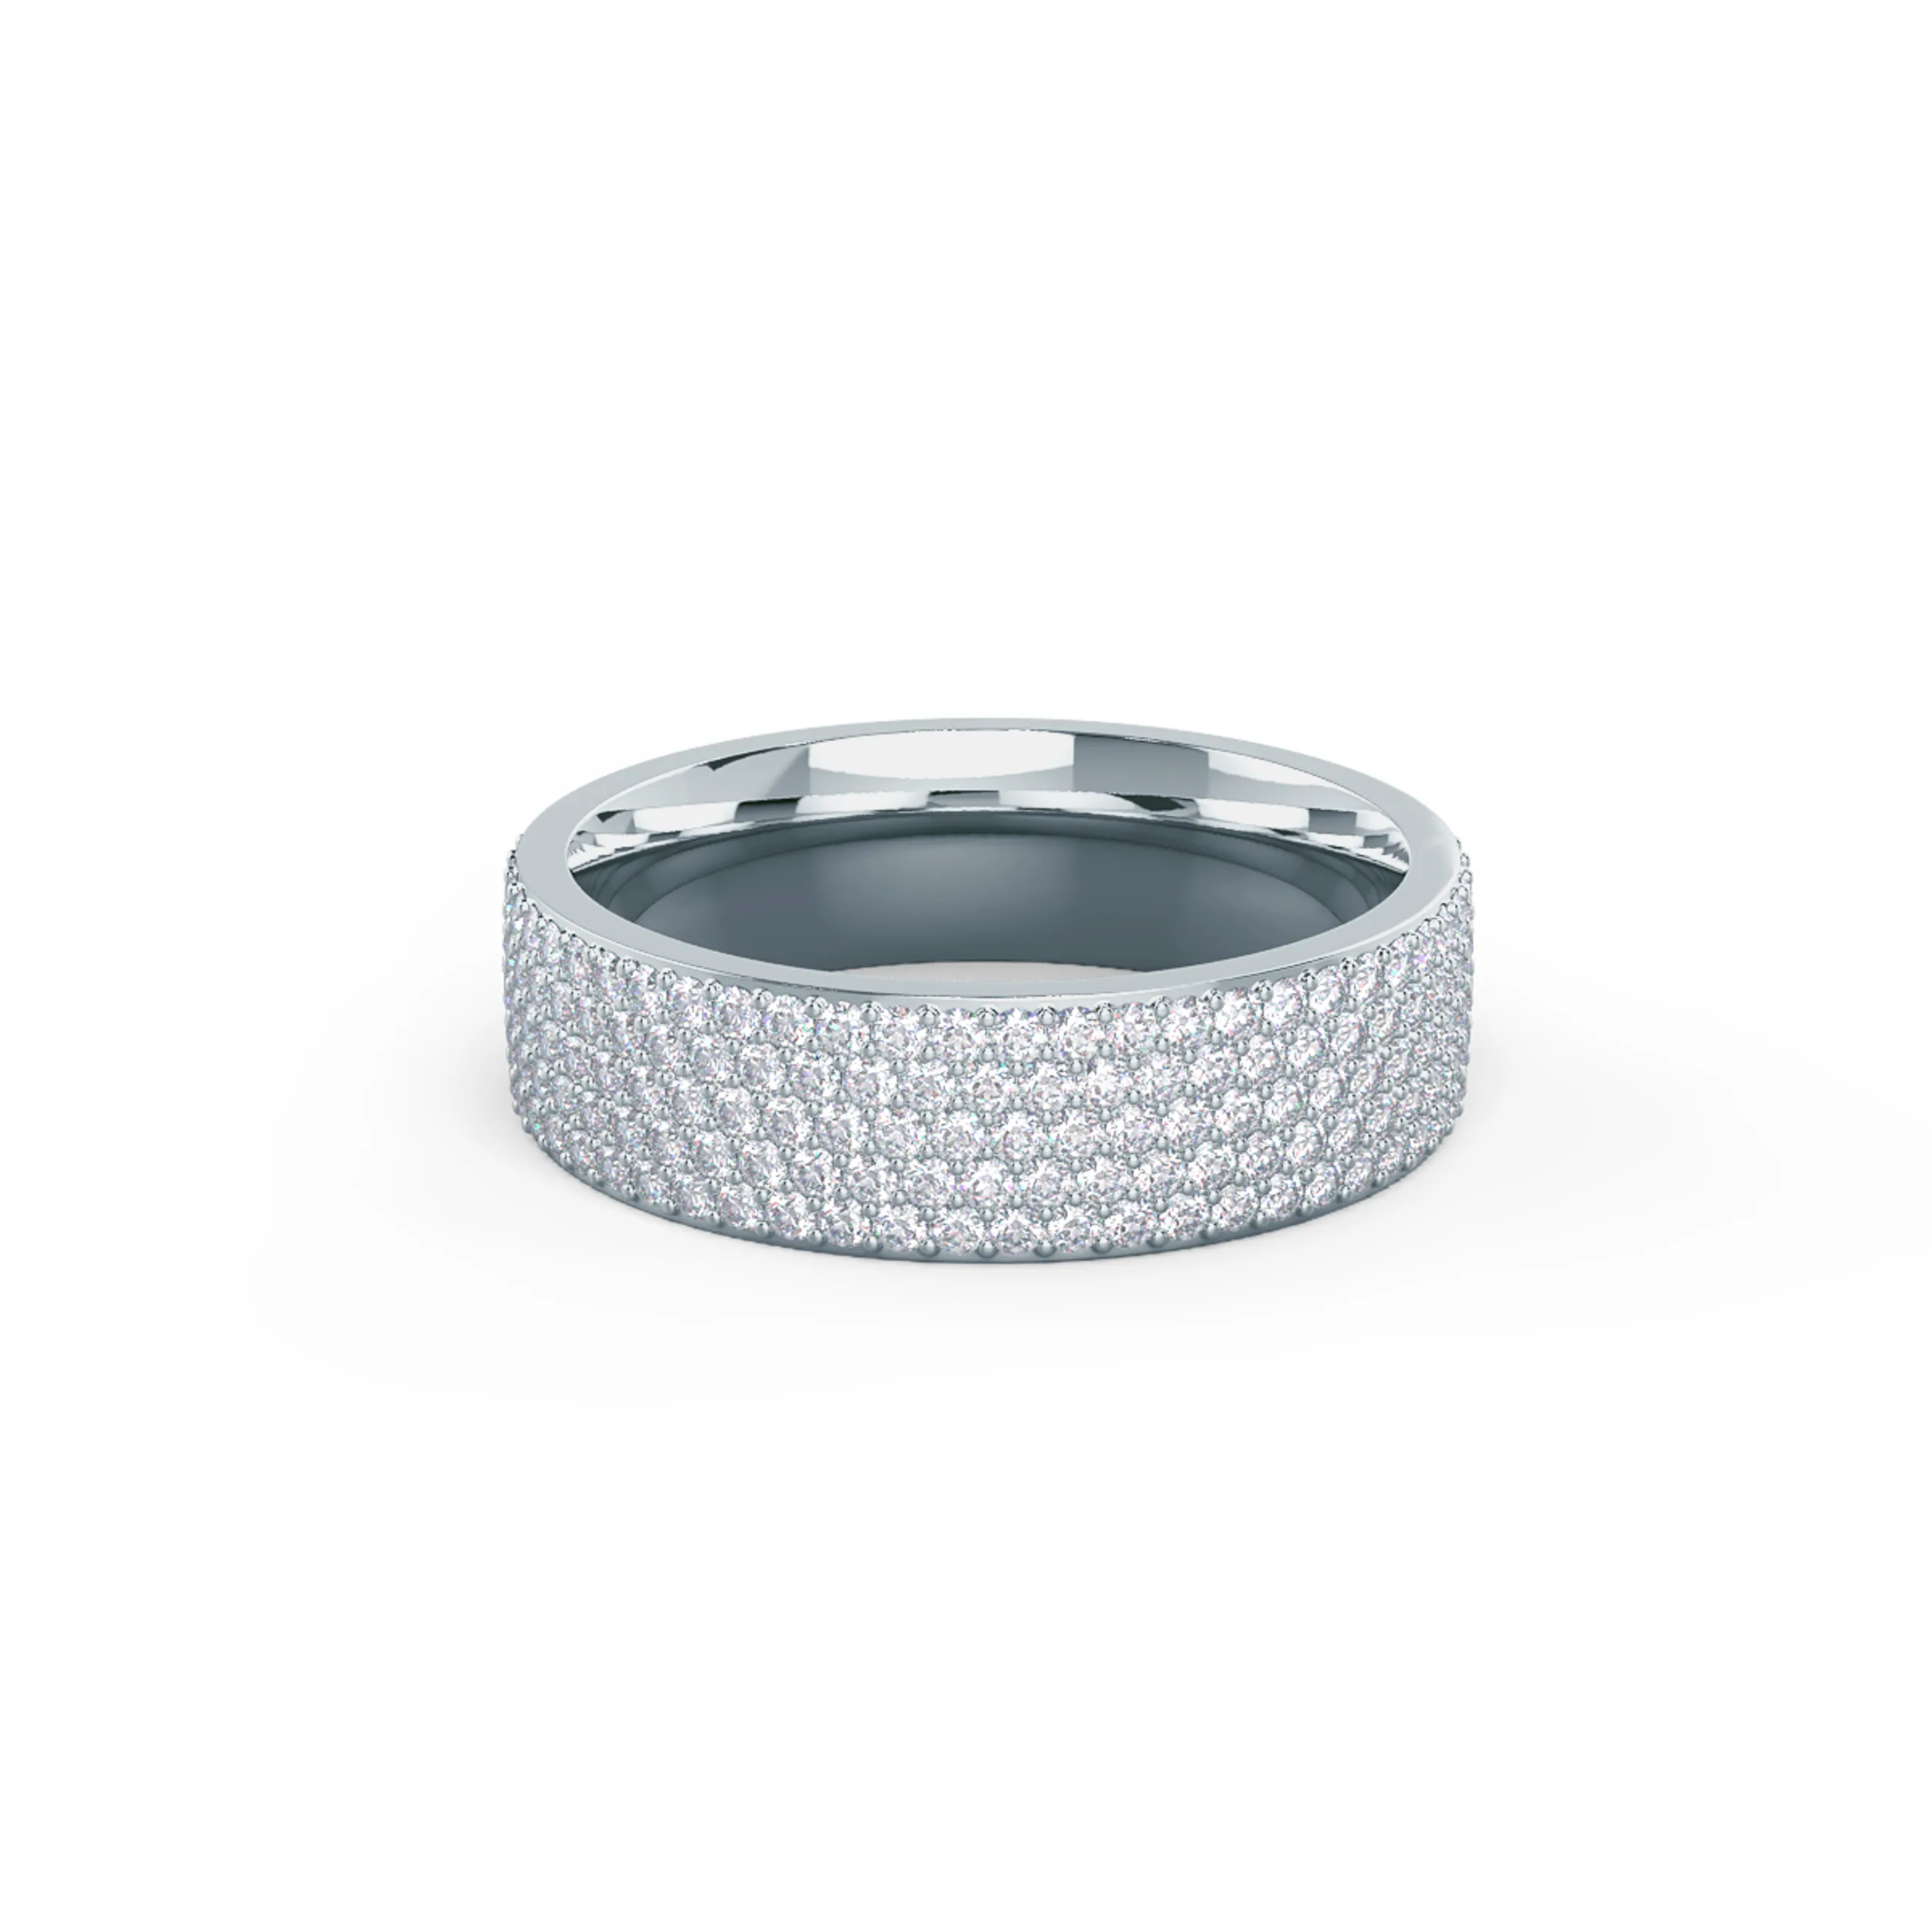 1.5 ct Round Brilliant Lab Created Diamonds Five Row Pavé Eternity Band in 18k White Gold (Main View)